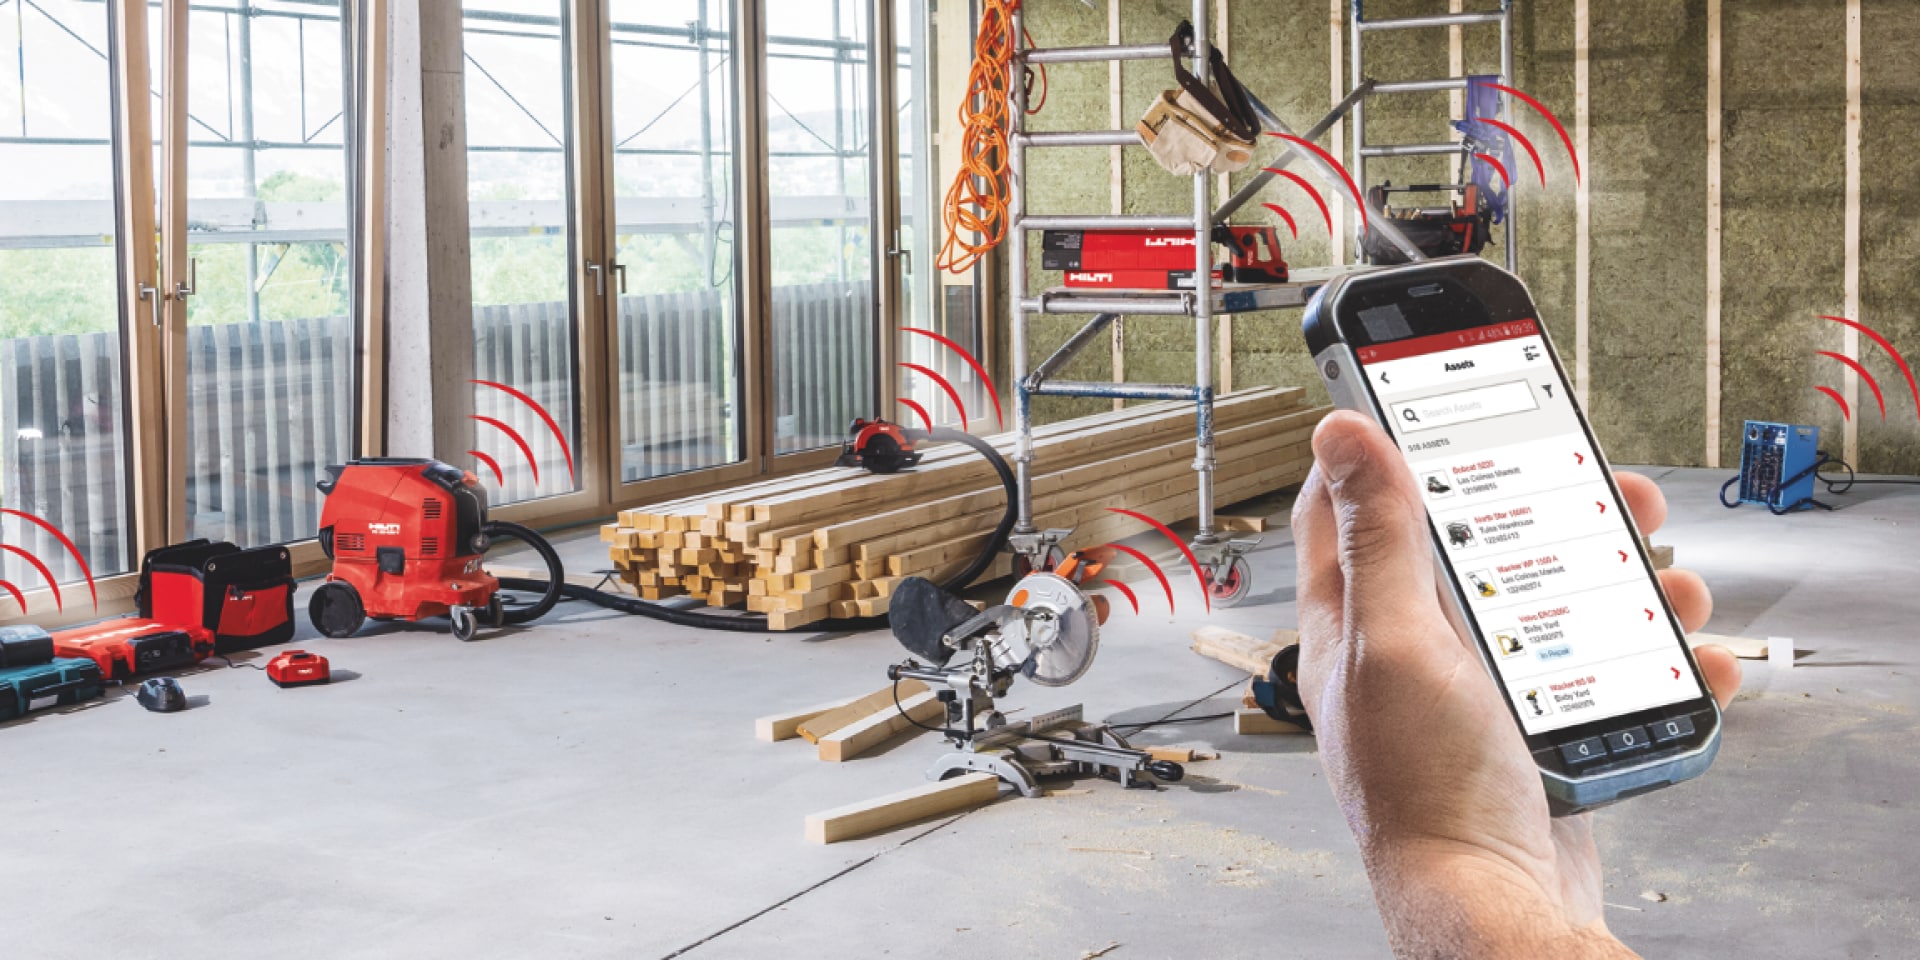 Hilti ON!TRACK 3 App brings hassle-free tool services to your fingertips